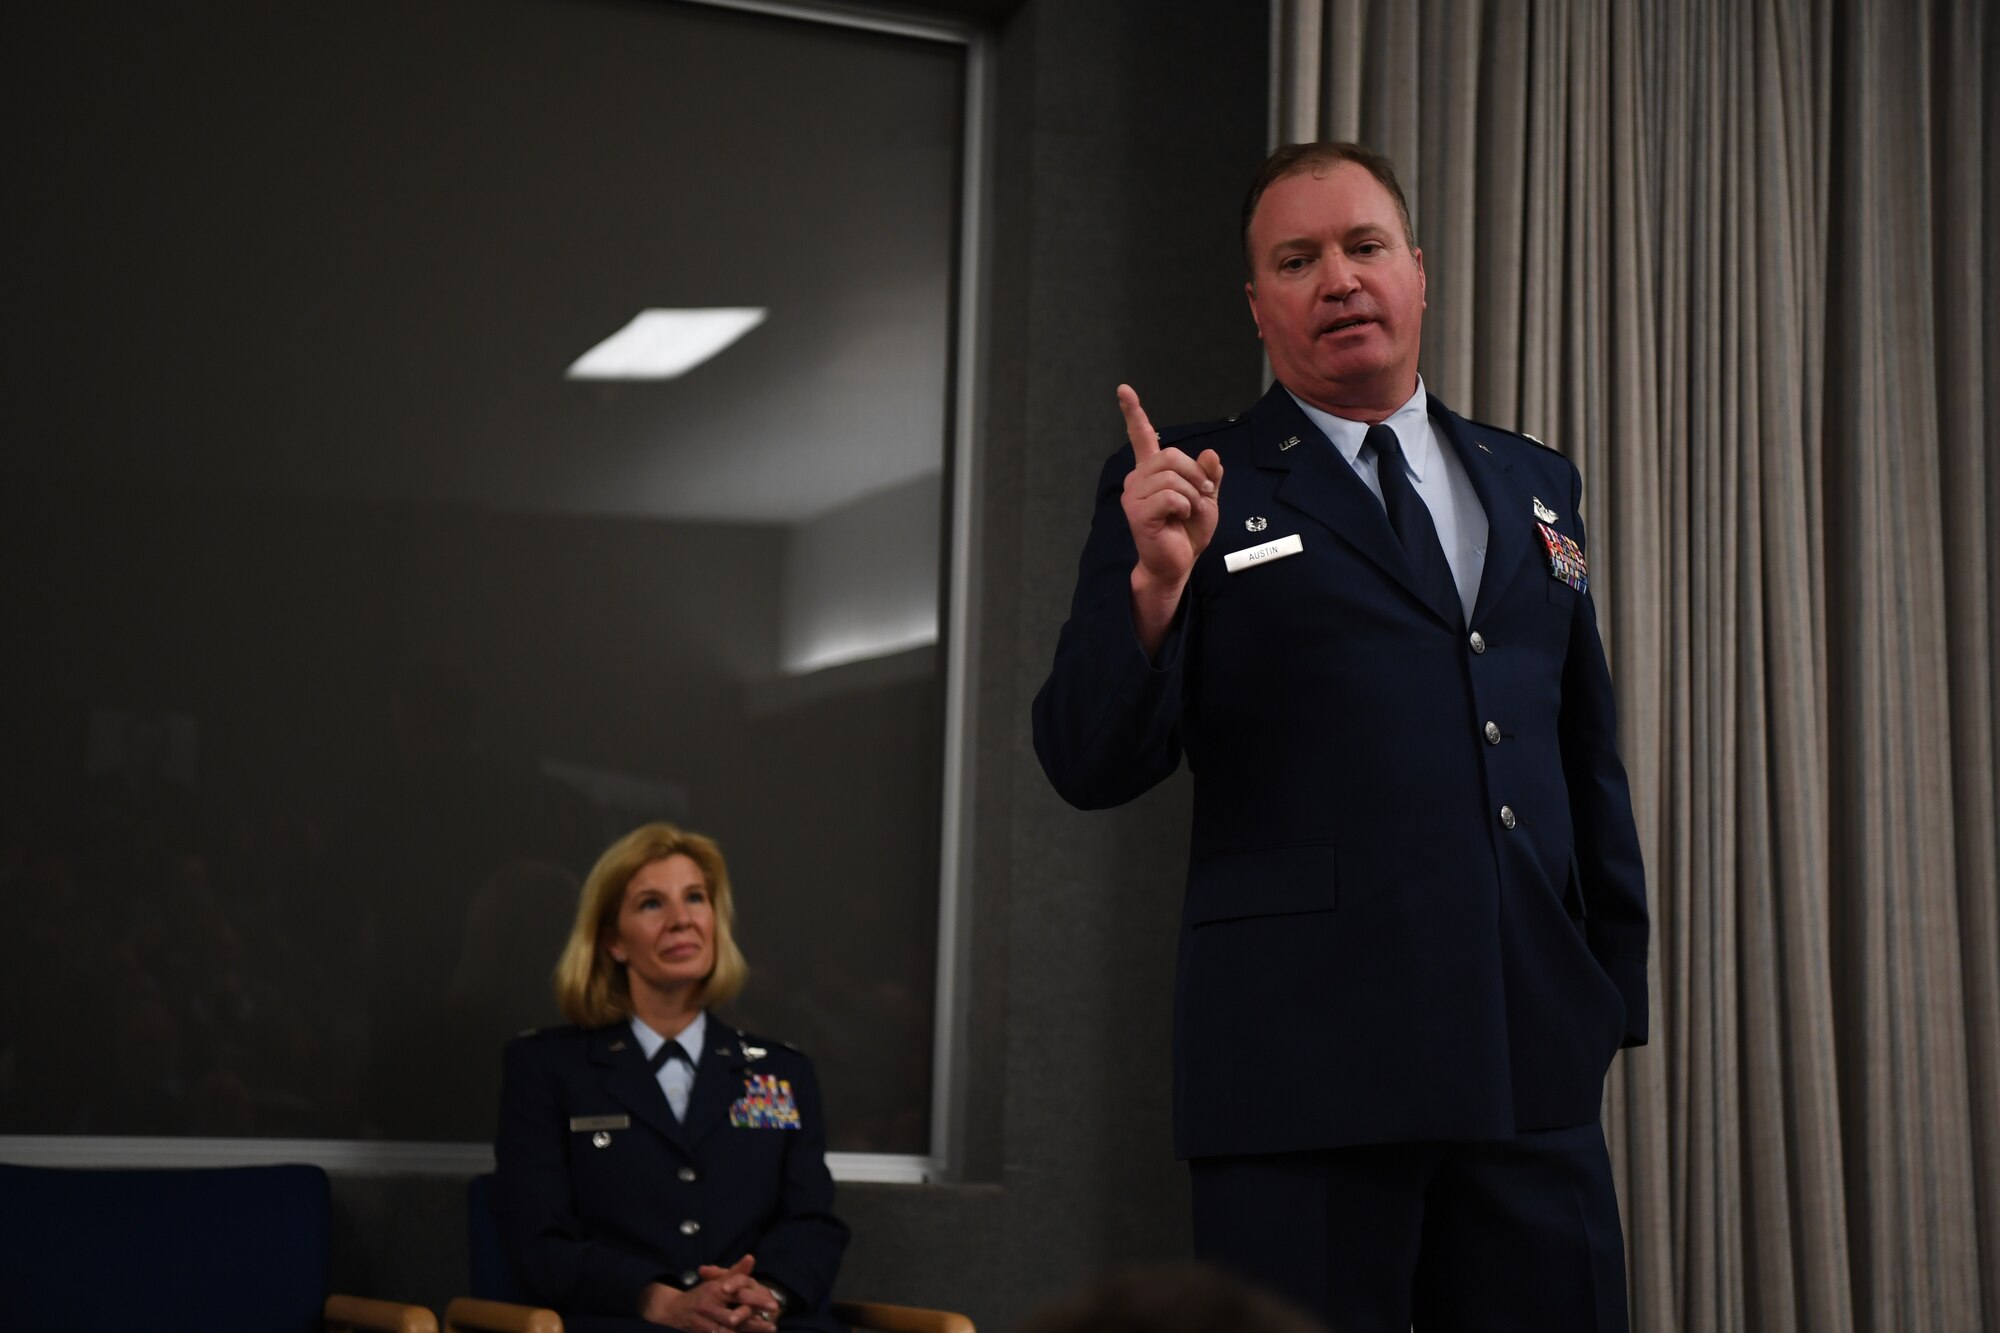 Lt. Col. Joe Austin addresses an audience of friends, family and peers after assuming command of the 72nd Air Refueling Squadron at Grissom Air Reserve Base, Ind., April 7, 2018. Deeply rooted in military tradition since the middle ages, change of command ceremonies afford service members the opportunity to witness a symbolic passing of the torch.  (U.S. Air Force photo/Senior Airman Harrison Withrow)